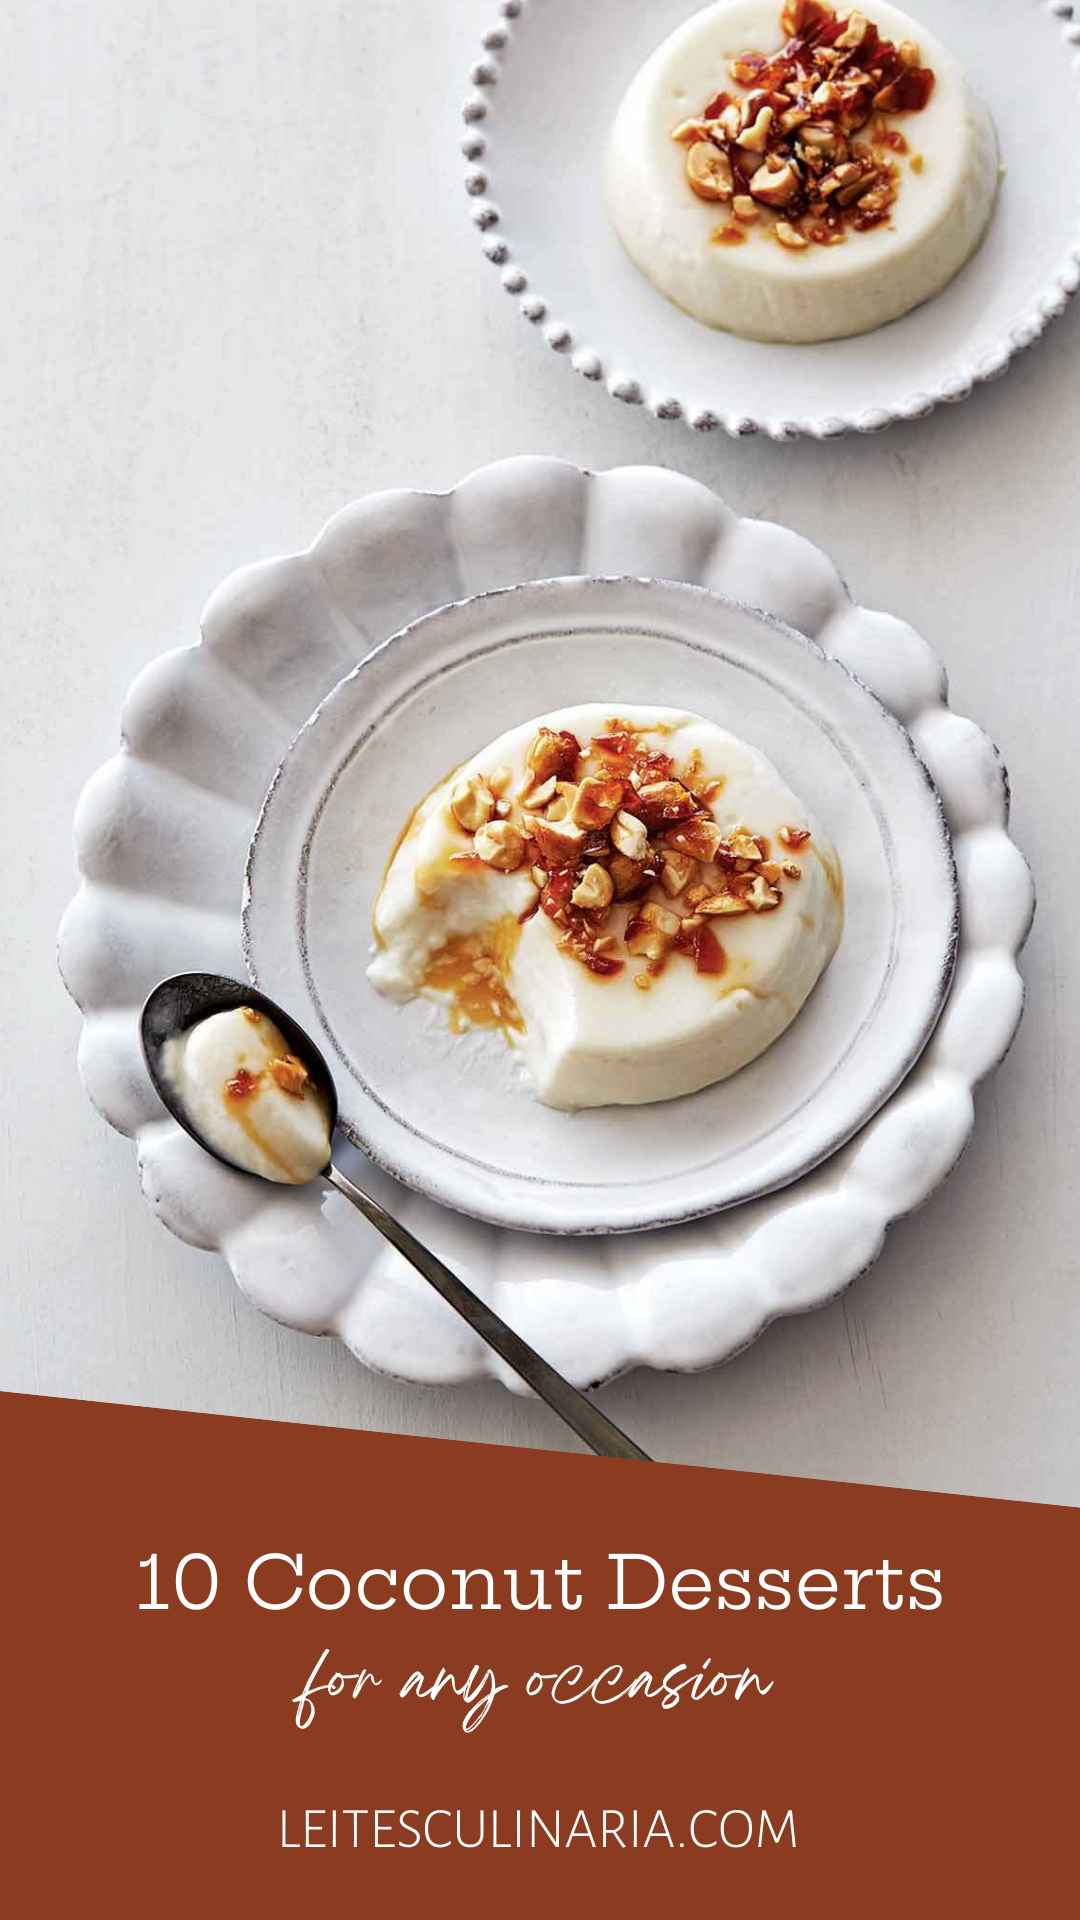 A coconut panna cotta topped with peanut brittle crunch on a white plate.